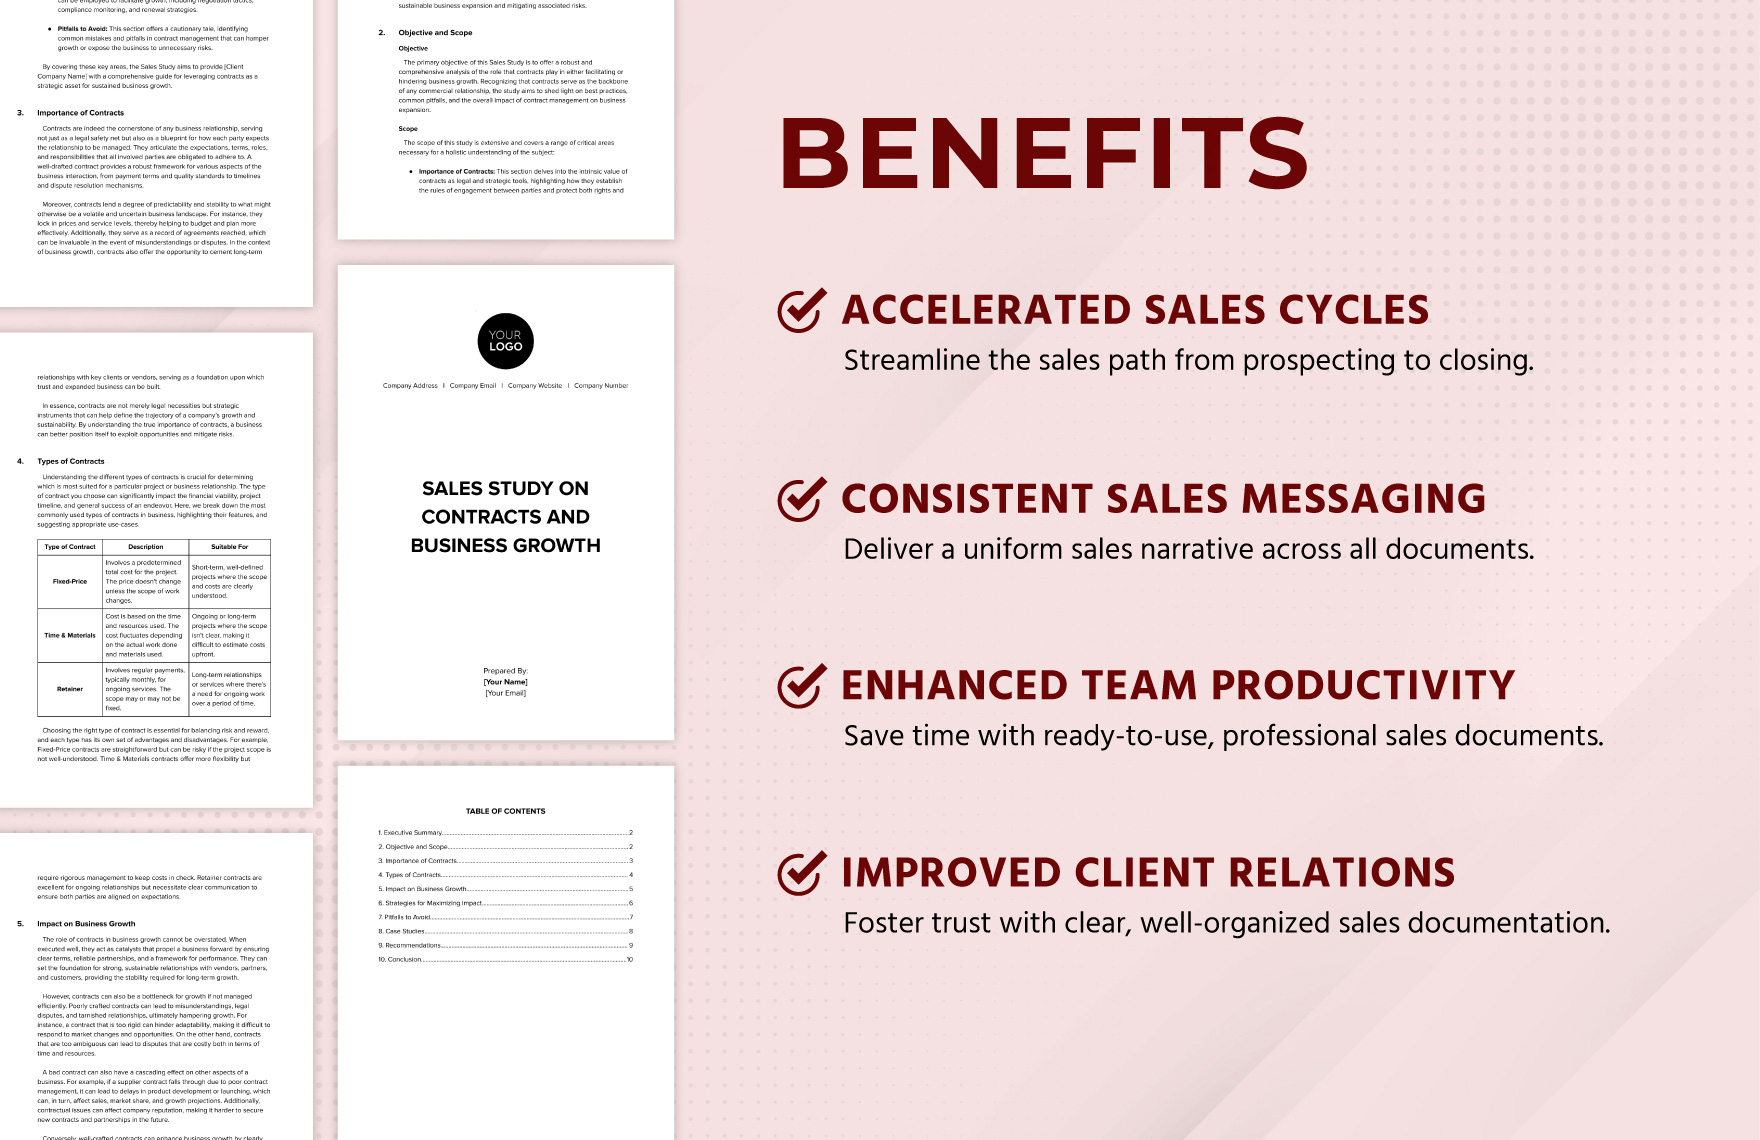 Sales Study on Contracts and Business Growth Template